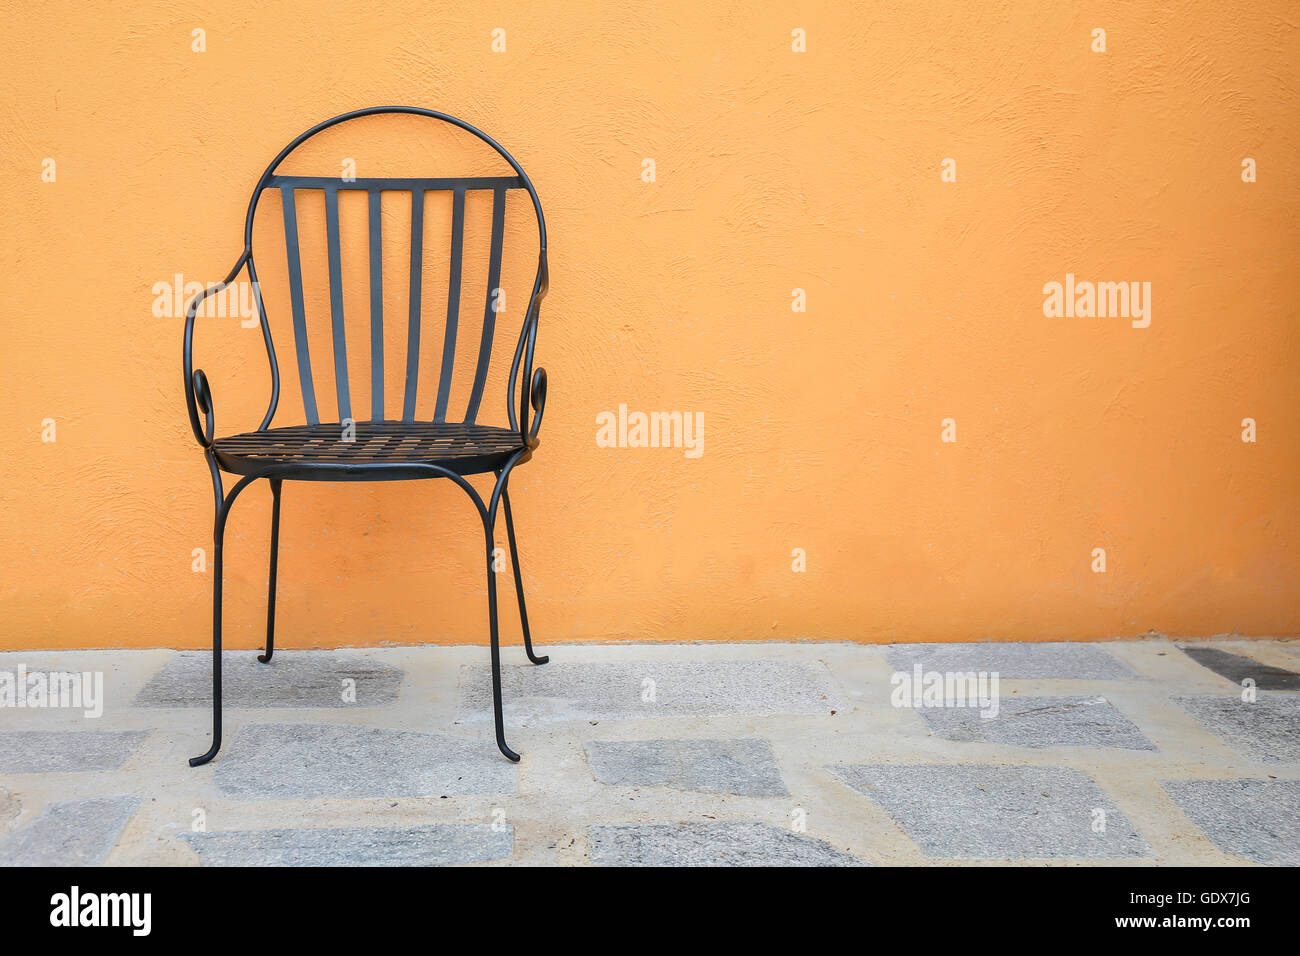 Chairs placed outside Stock Photo